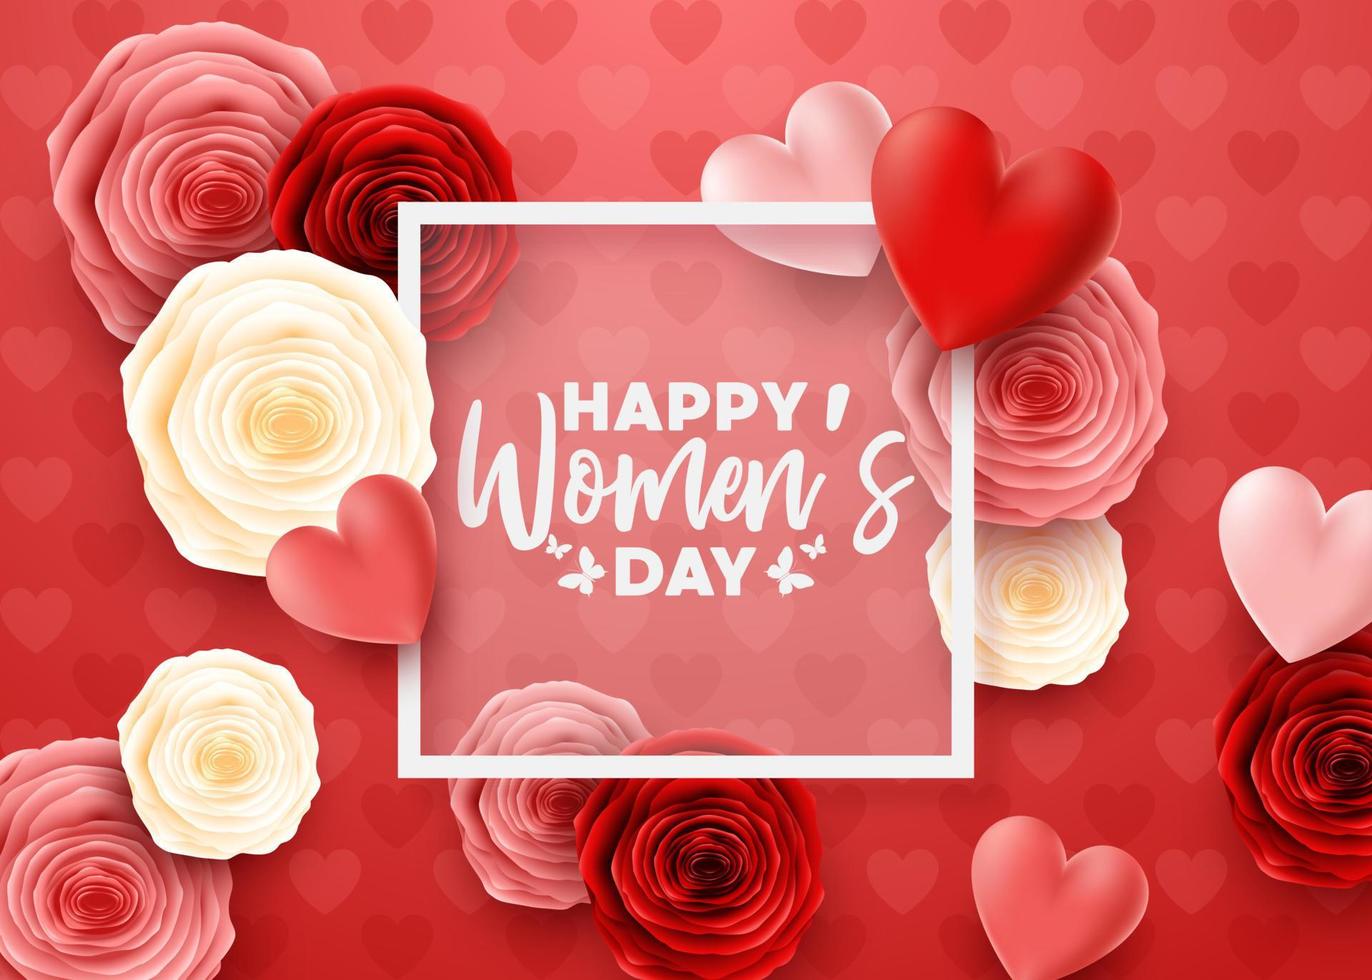 Happy International Women's Day with flower background vector